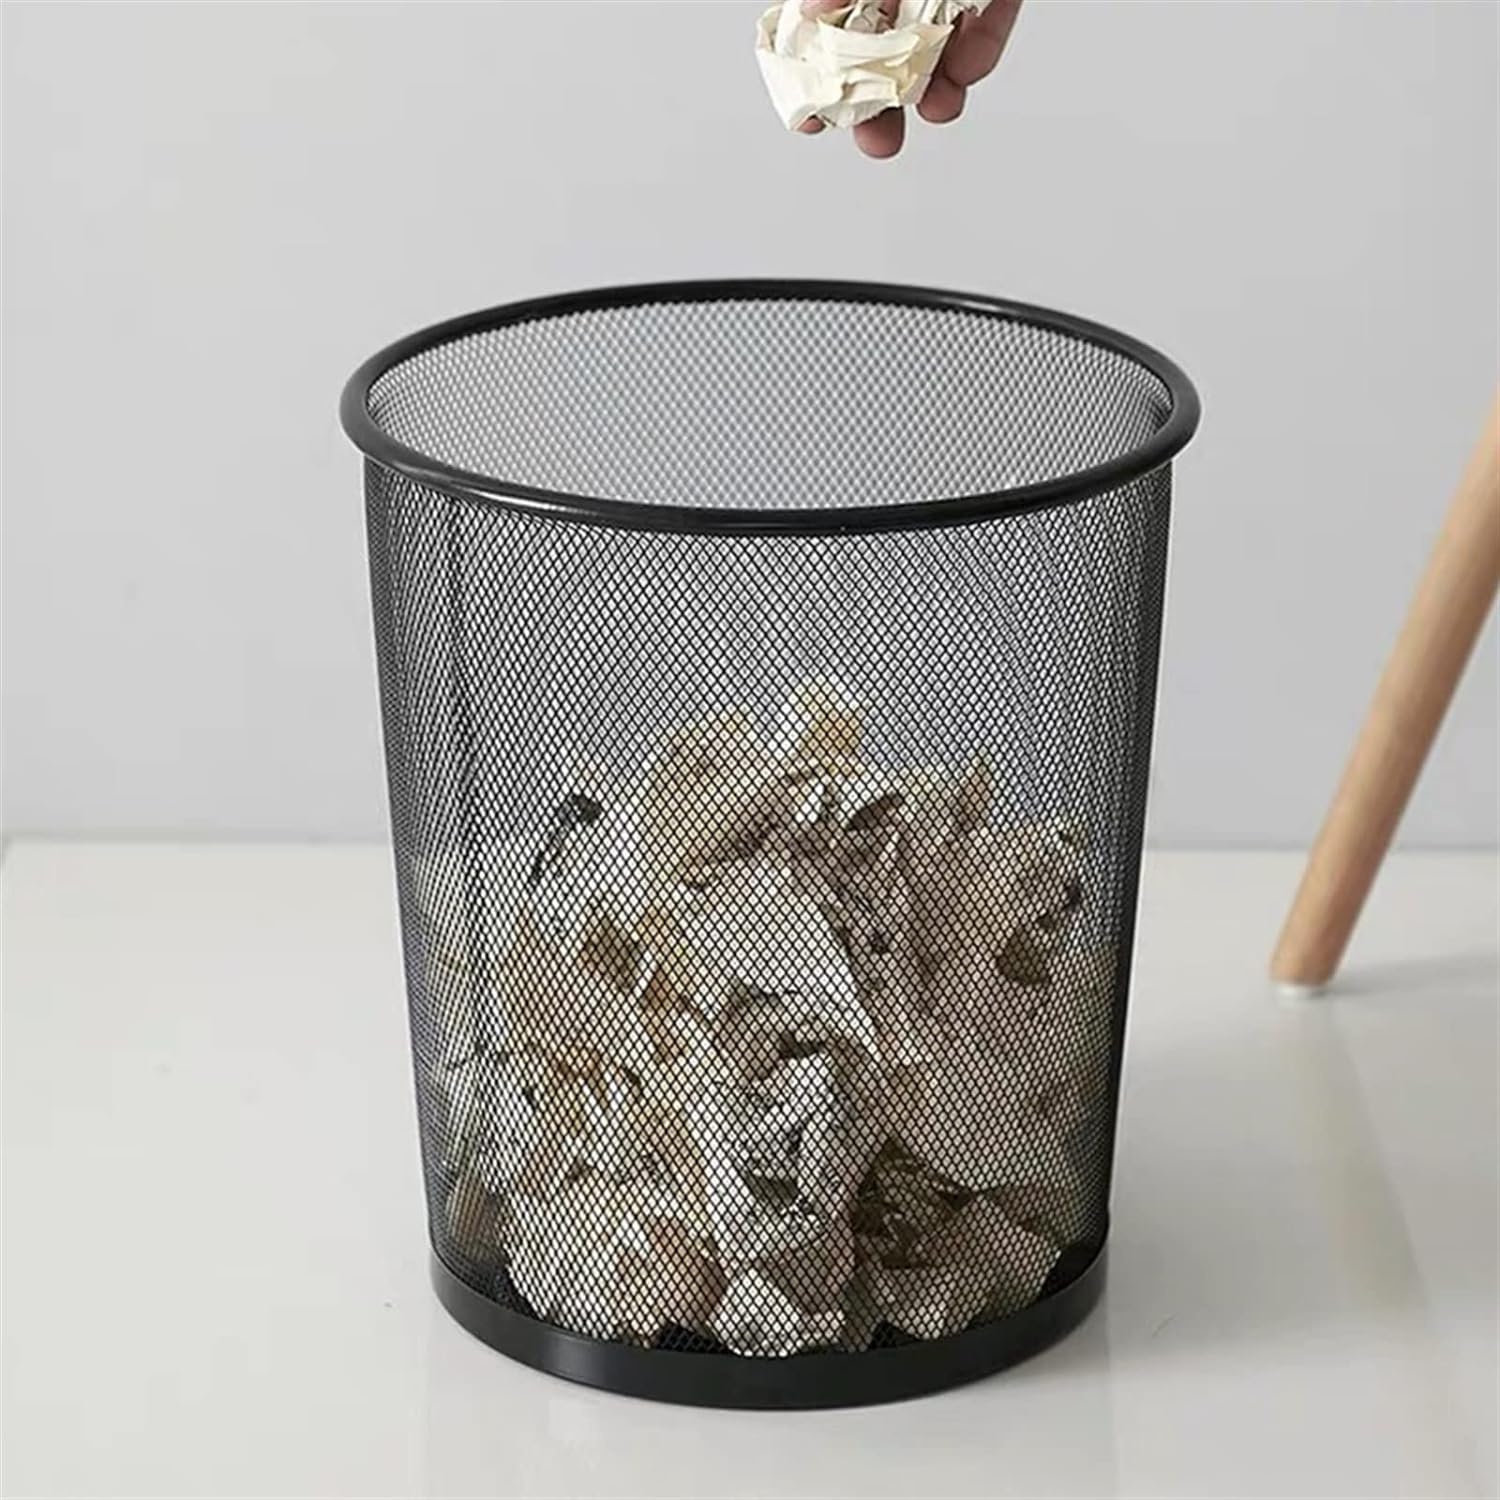 Black stainless steel mesh trash can